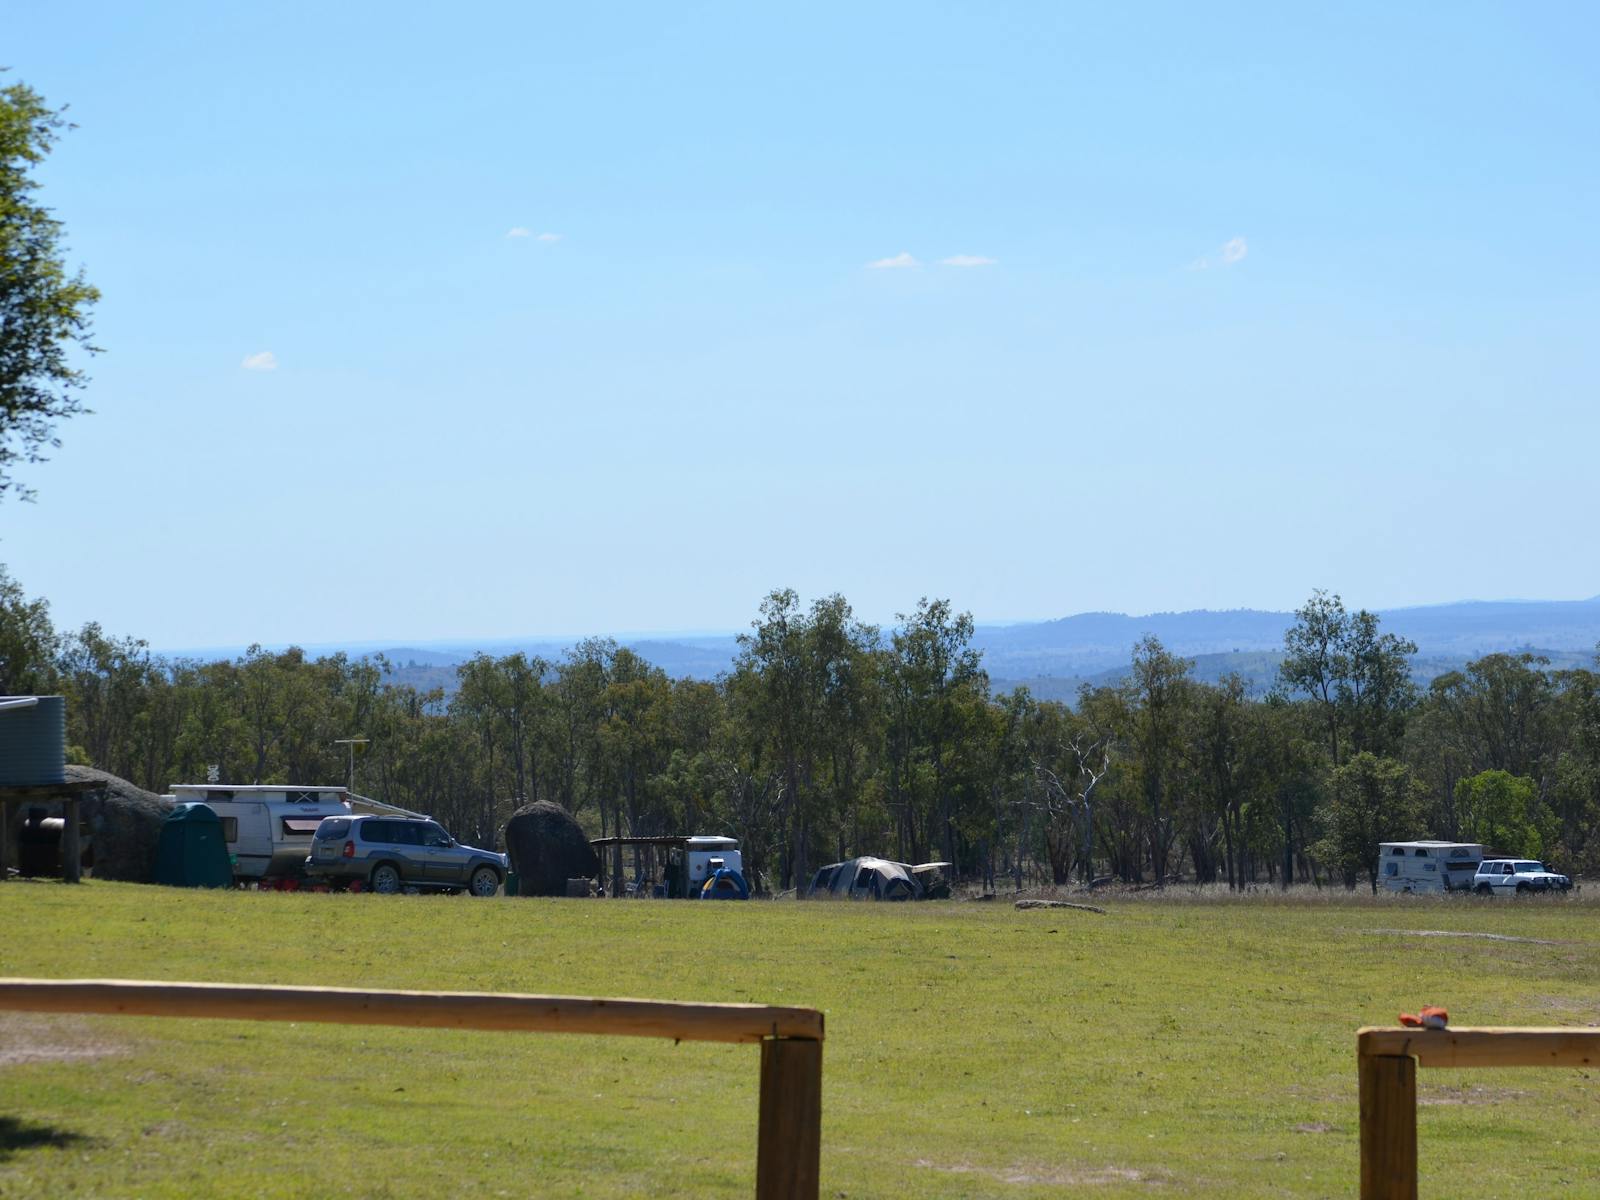 The main camping area at Goat Rock